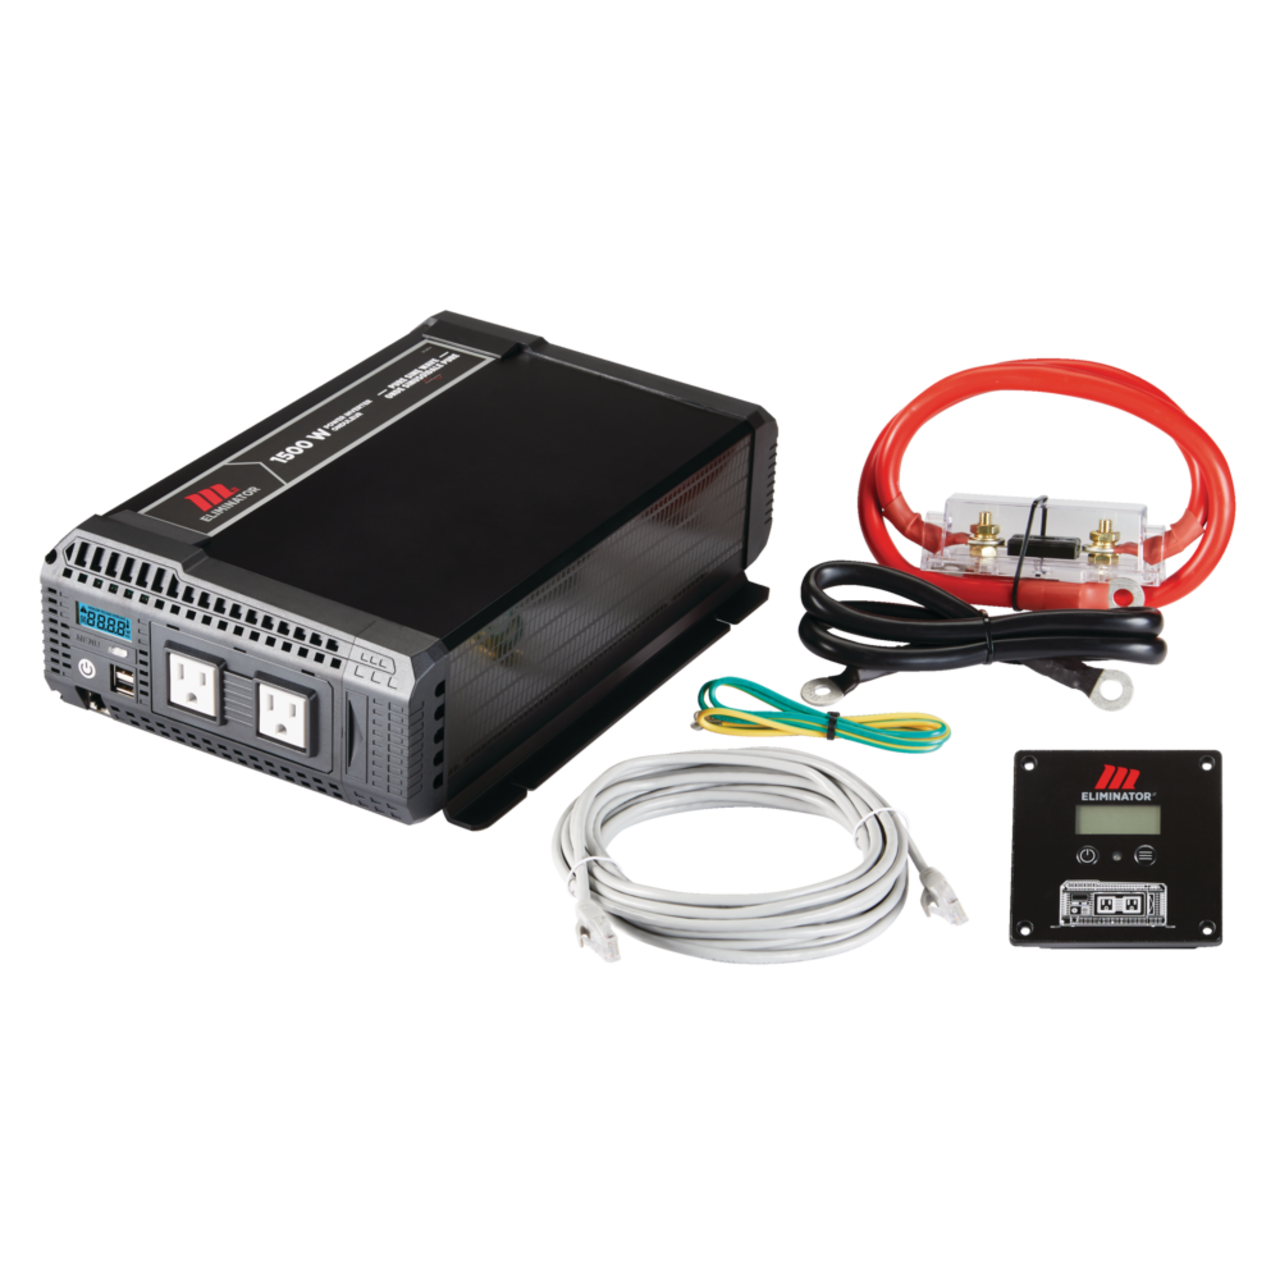 https://media-www.canadiantire.ca/product/automotive/light-auto-parts/auto-battery-accessories/0112103/motomaster-eliminator-1500w-pure-sine-wave-power-inverter-2dc32c60-5eed-4262-a2bf-6c055855f1dd.png?imdensity=1&imwidth=640&impolicy=mZoom